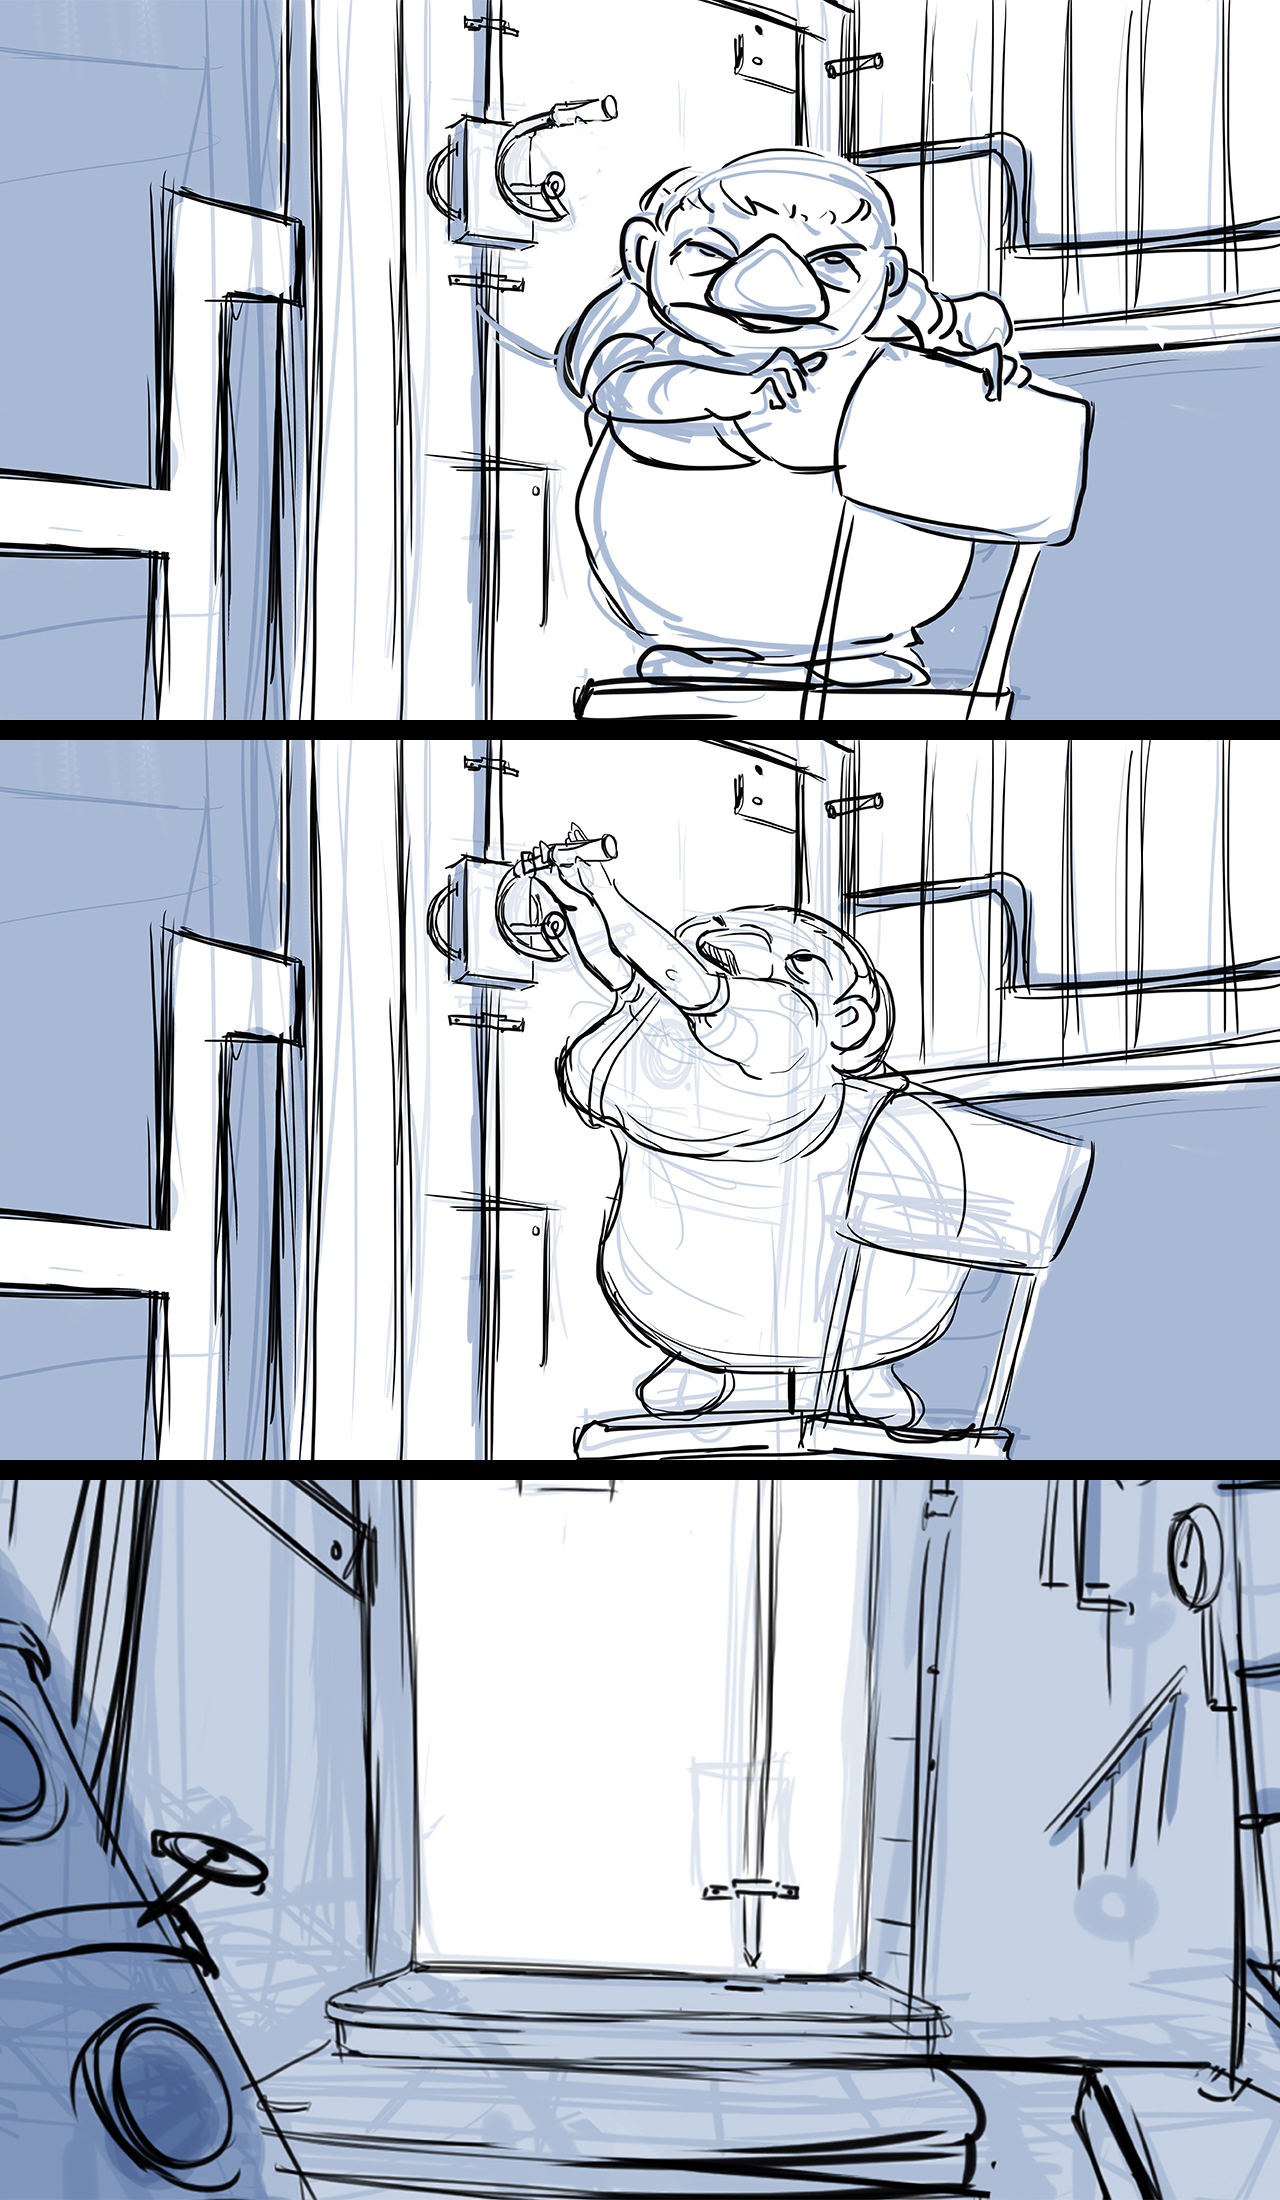 Storyboard sequence from an animated film. Sequence shows the woman standing on a chair before a giant door.  She opens the crazy thing after a bit of dialogue.